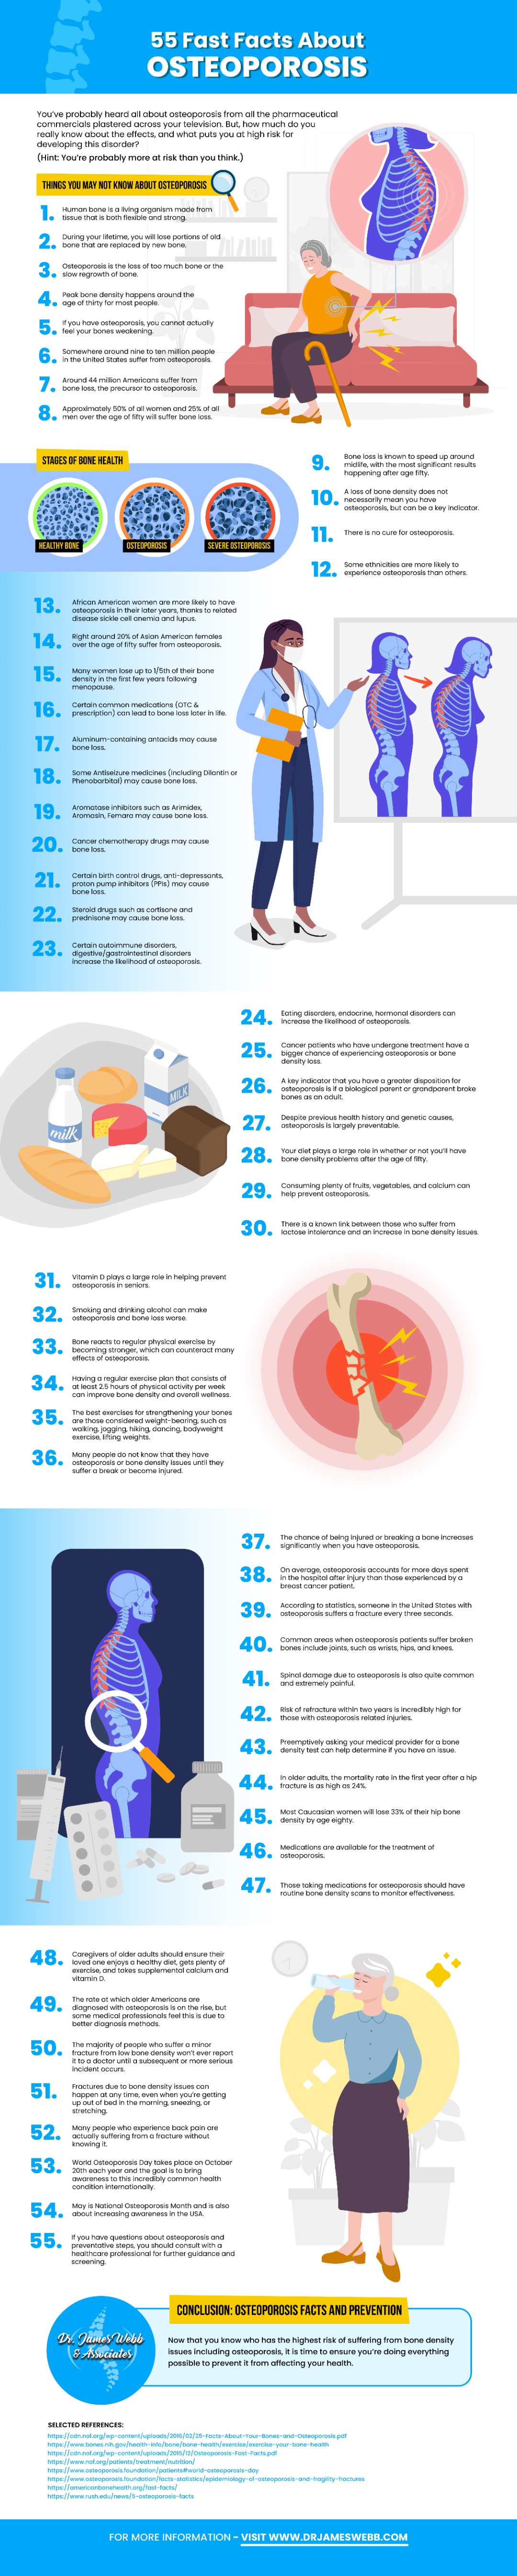 55 Fast Facts About Osteoporosis & Bone Health Infographic